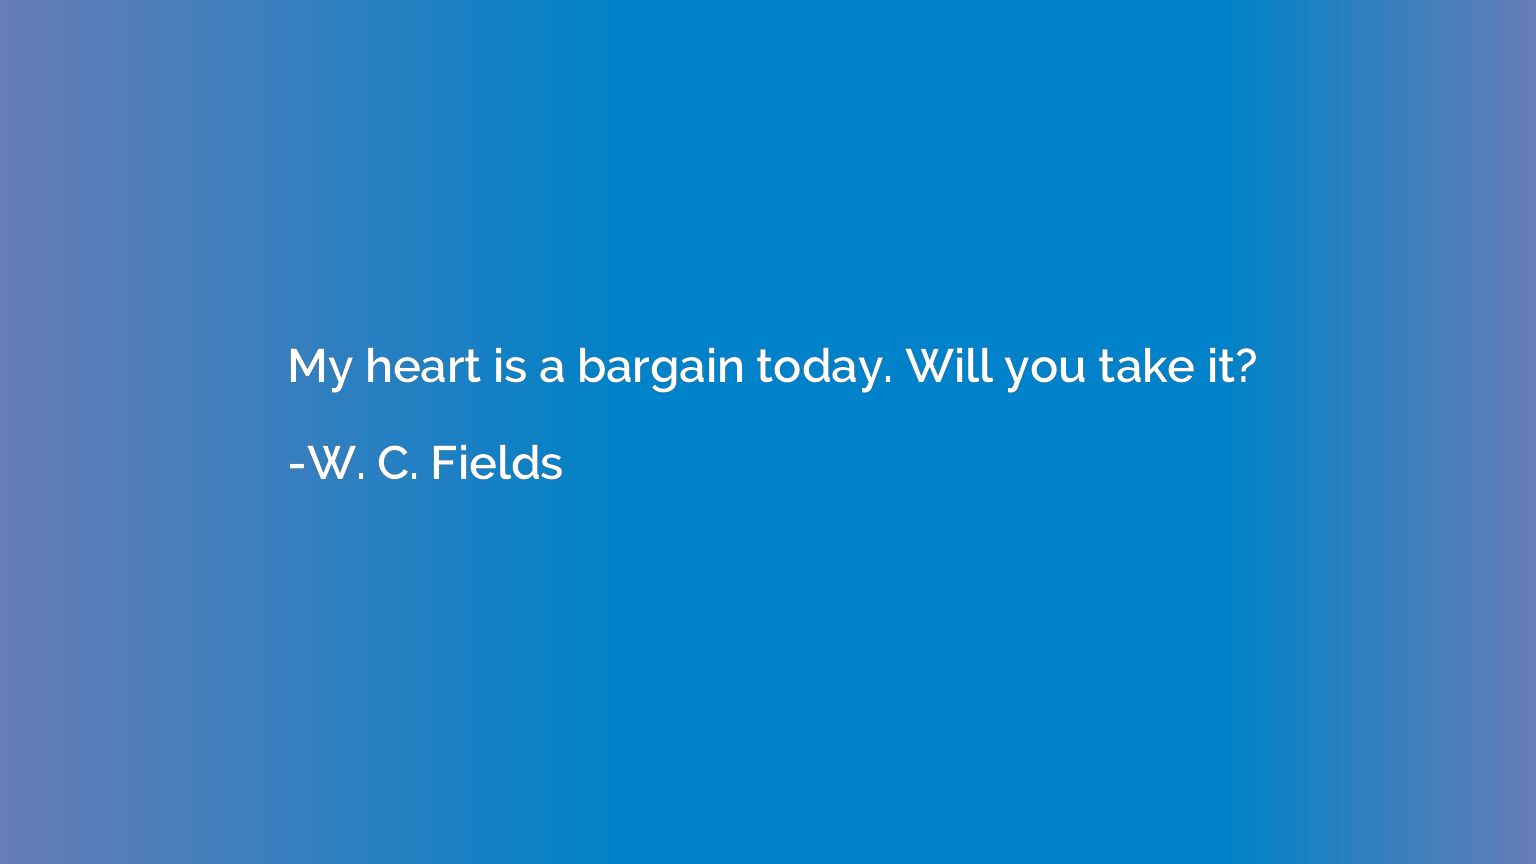 My heart is a bargain today. Will you take it?